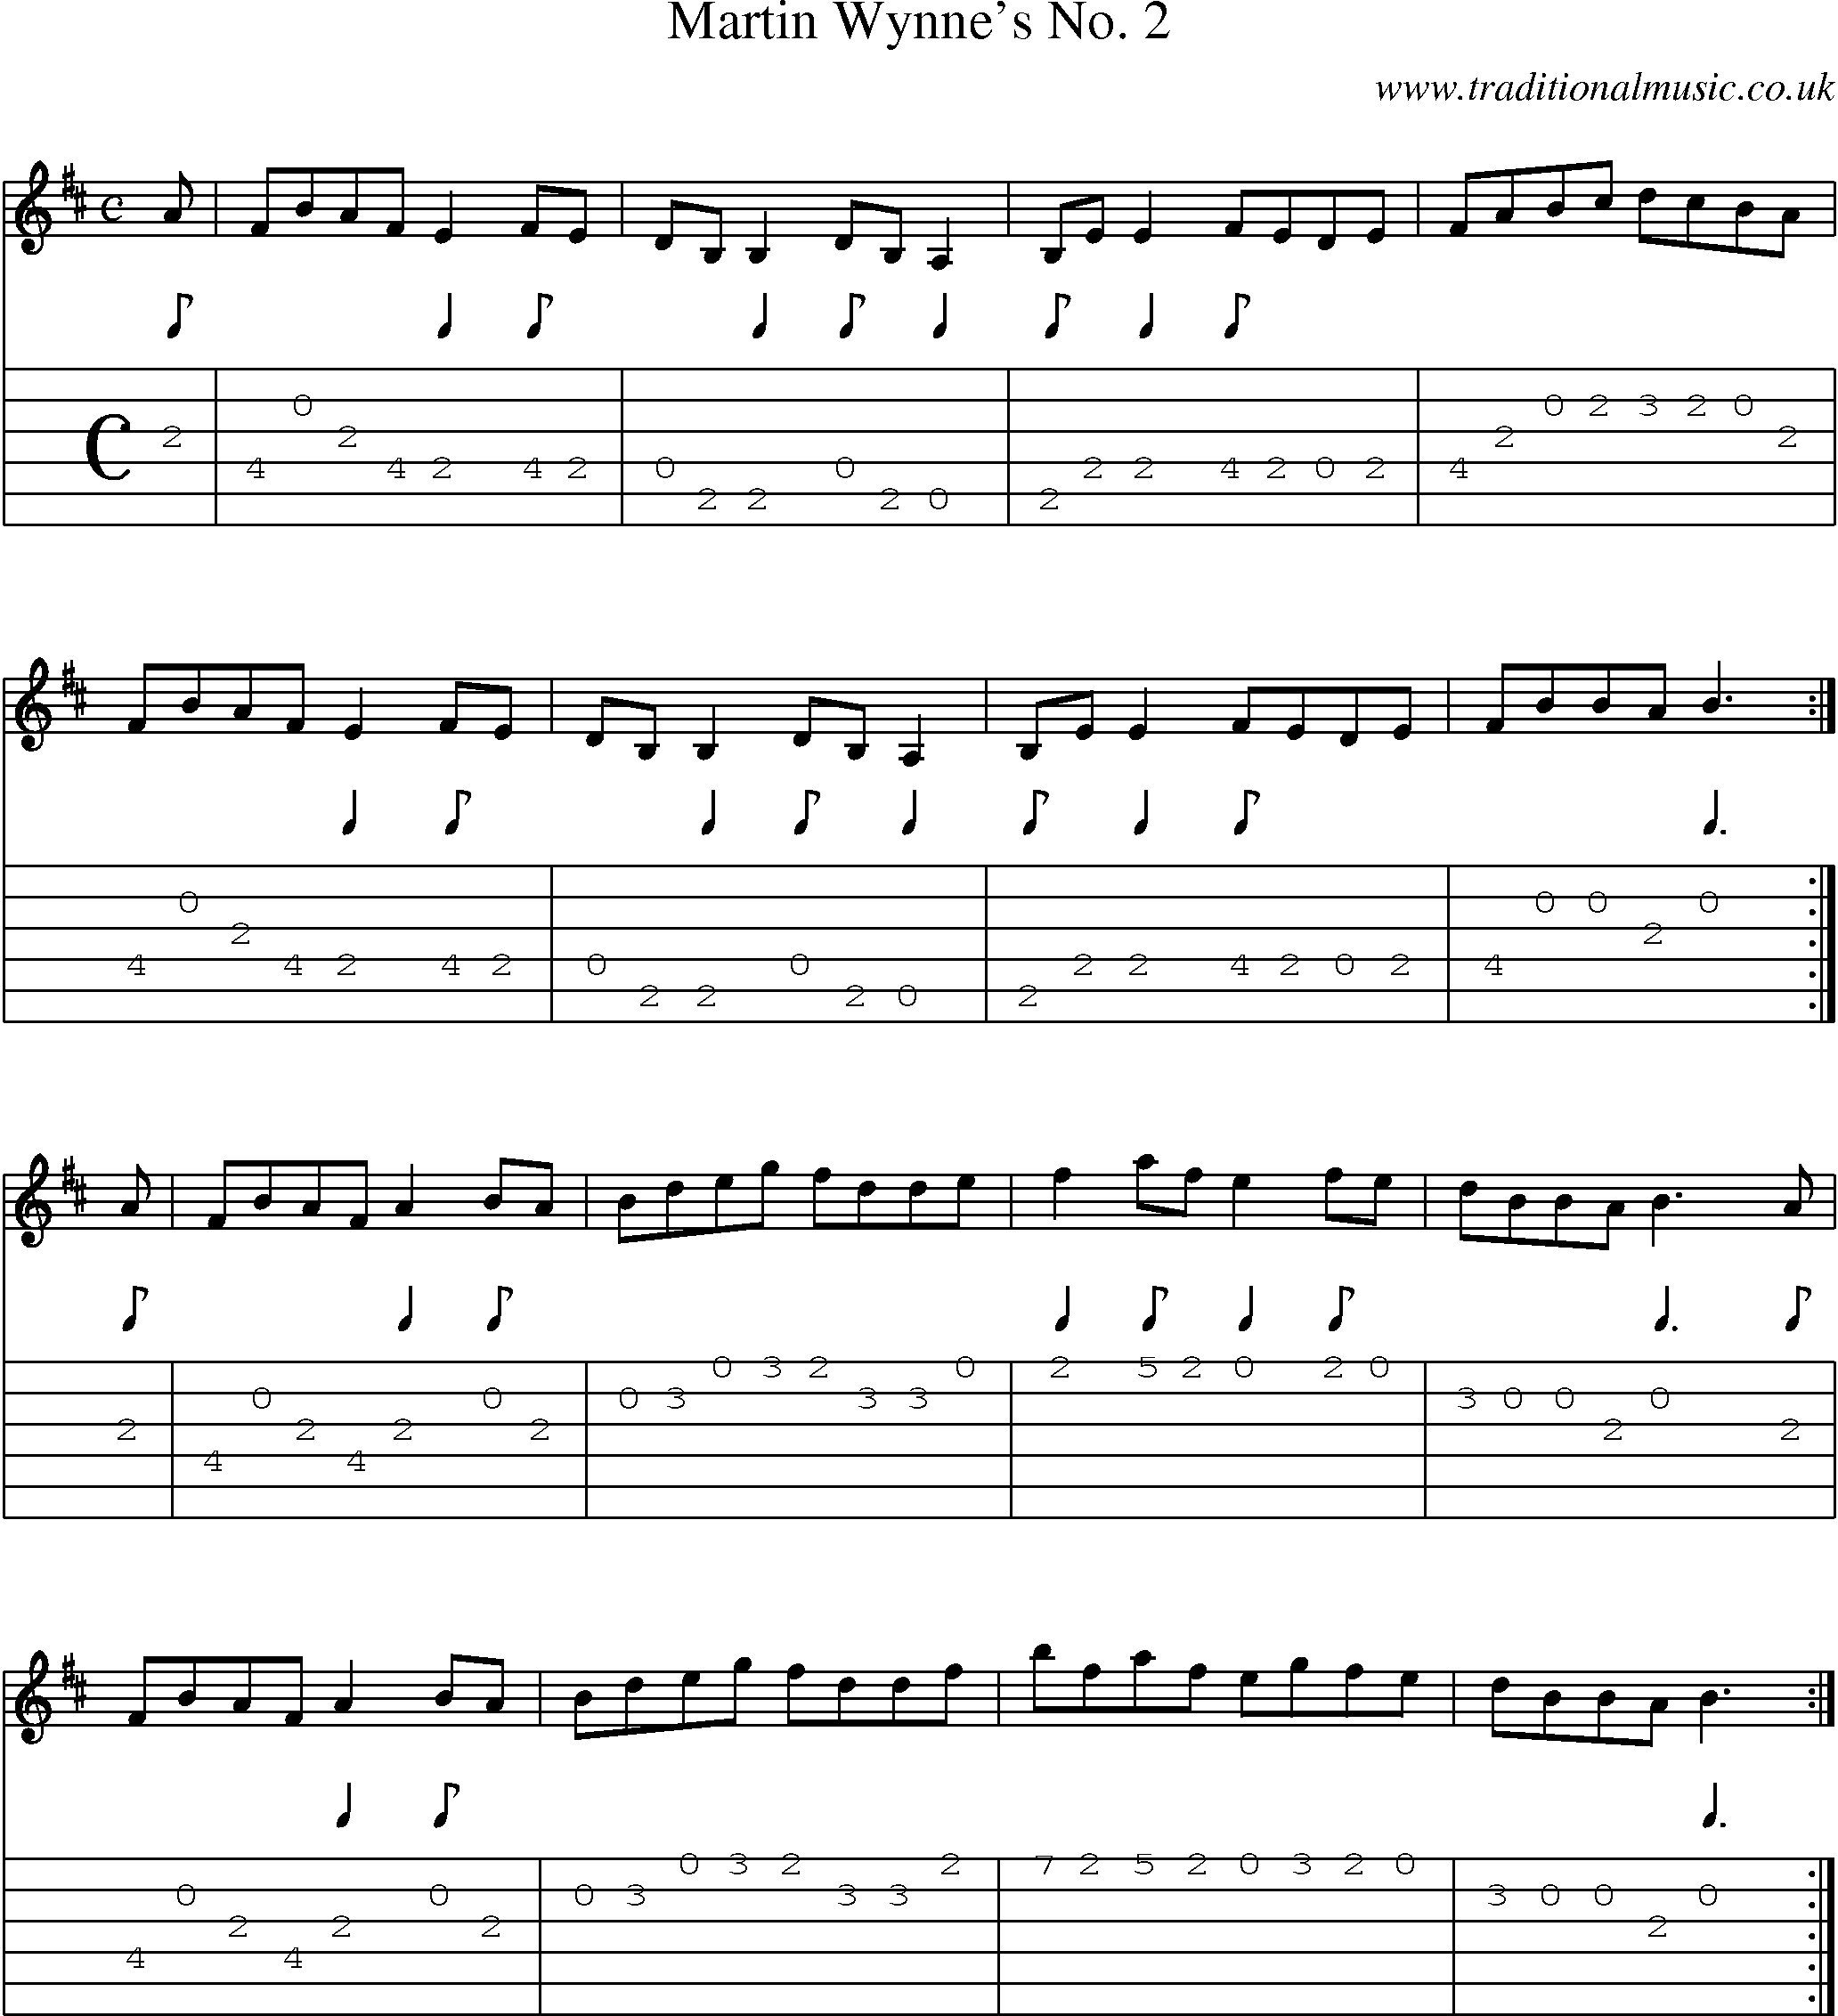 Music Score and Guitar Tabs for Martin Wynnes No 2